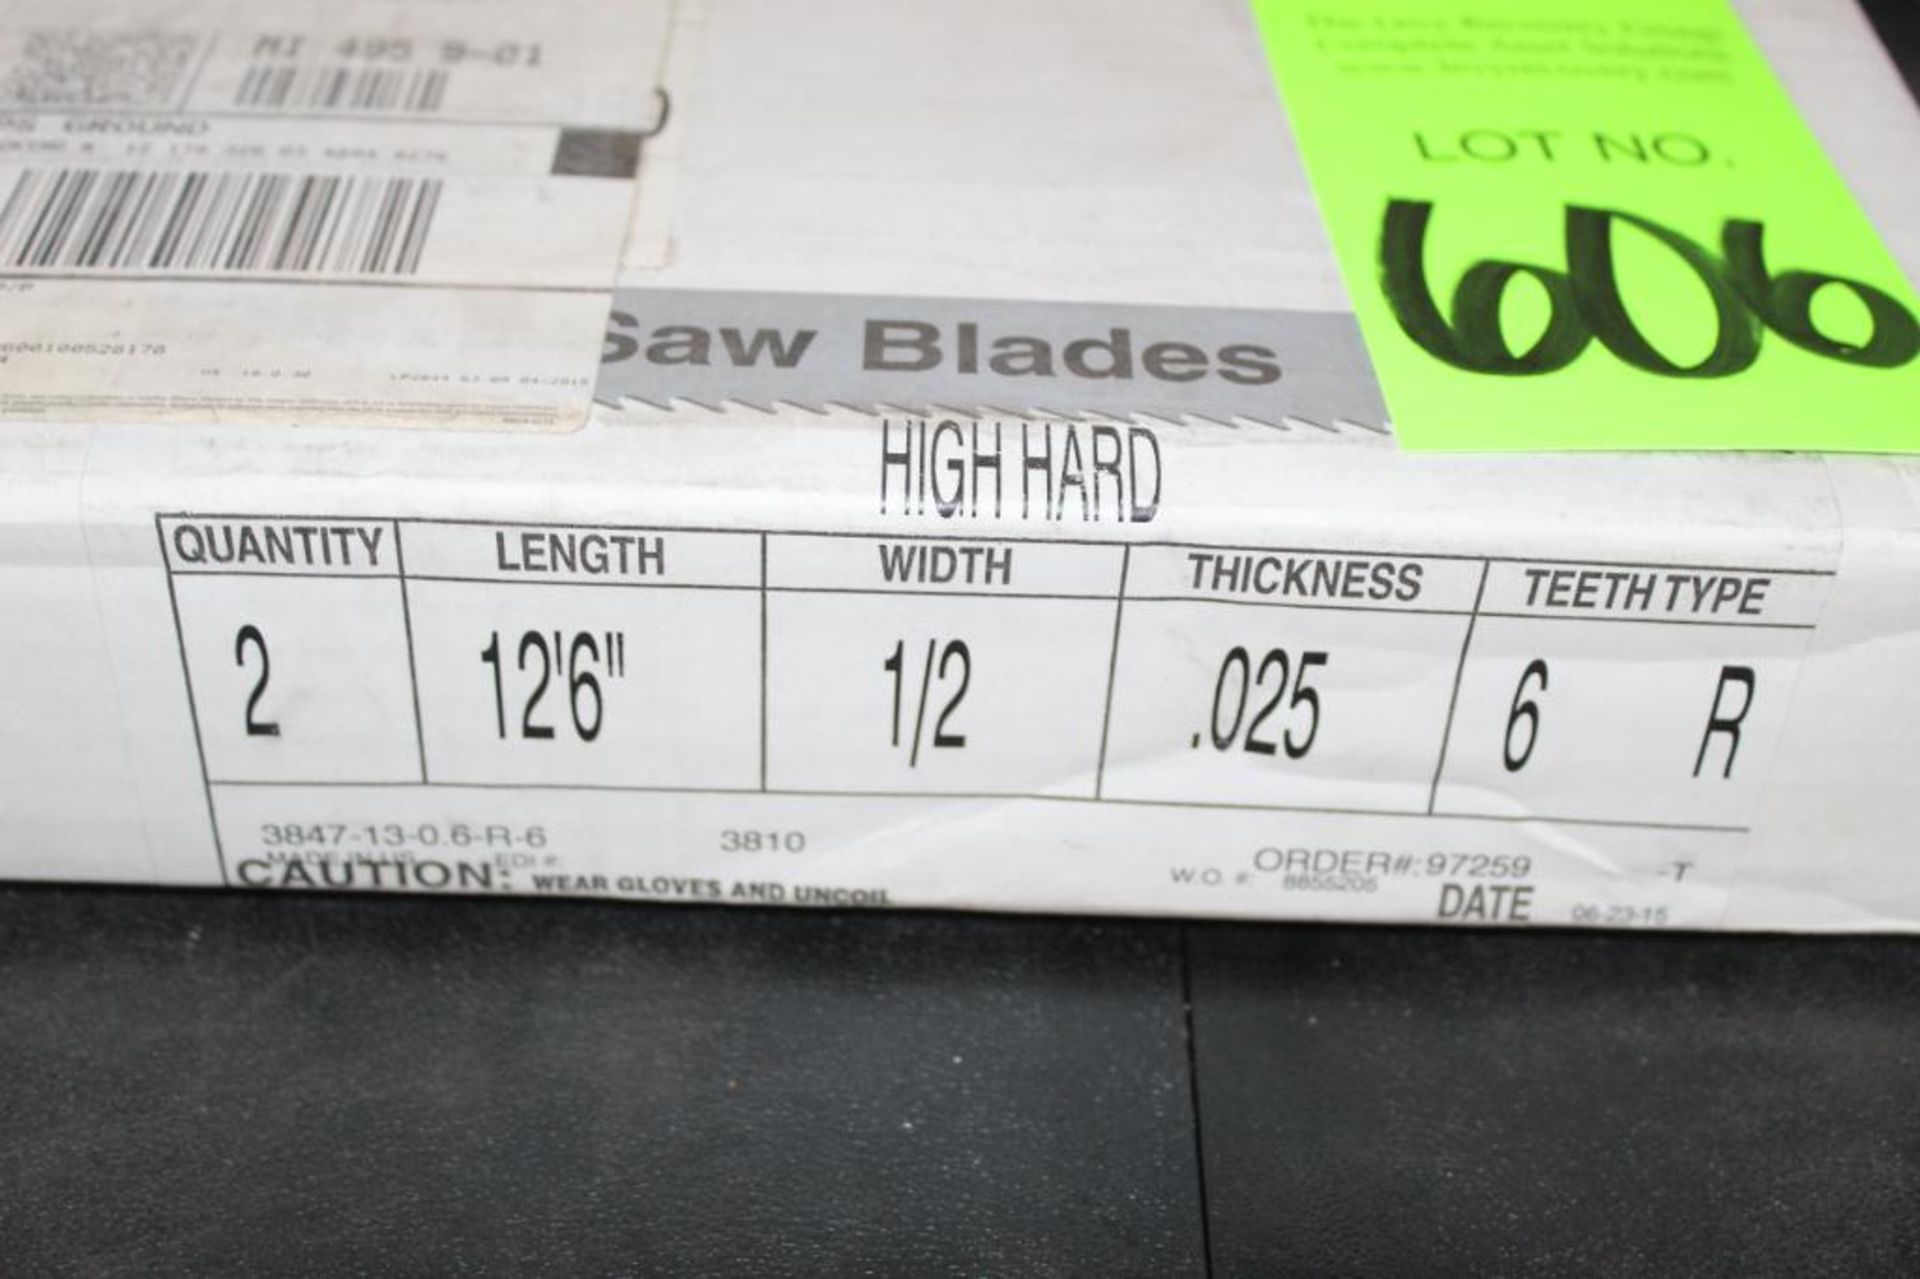 Lot of (2) Snap On Industrial Band Saw Blade High Hard 12'6" - Image 3 of 4